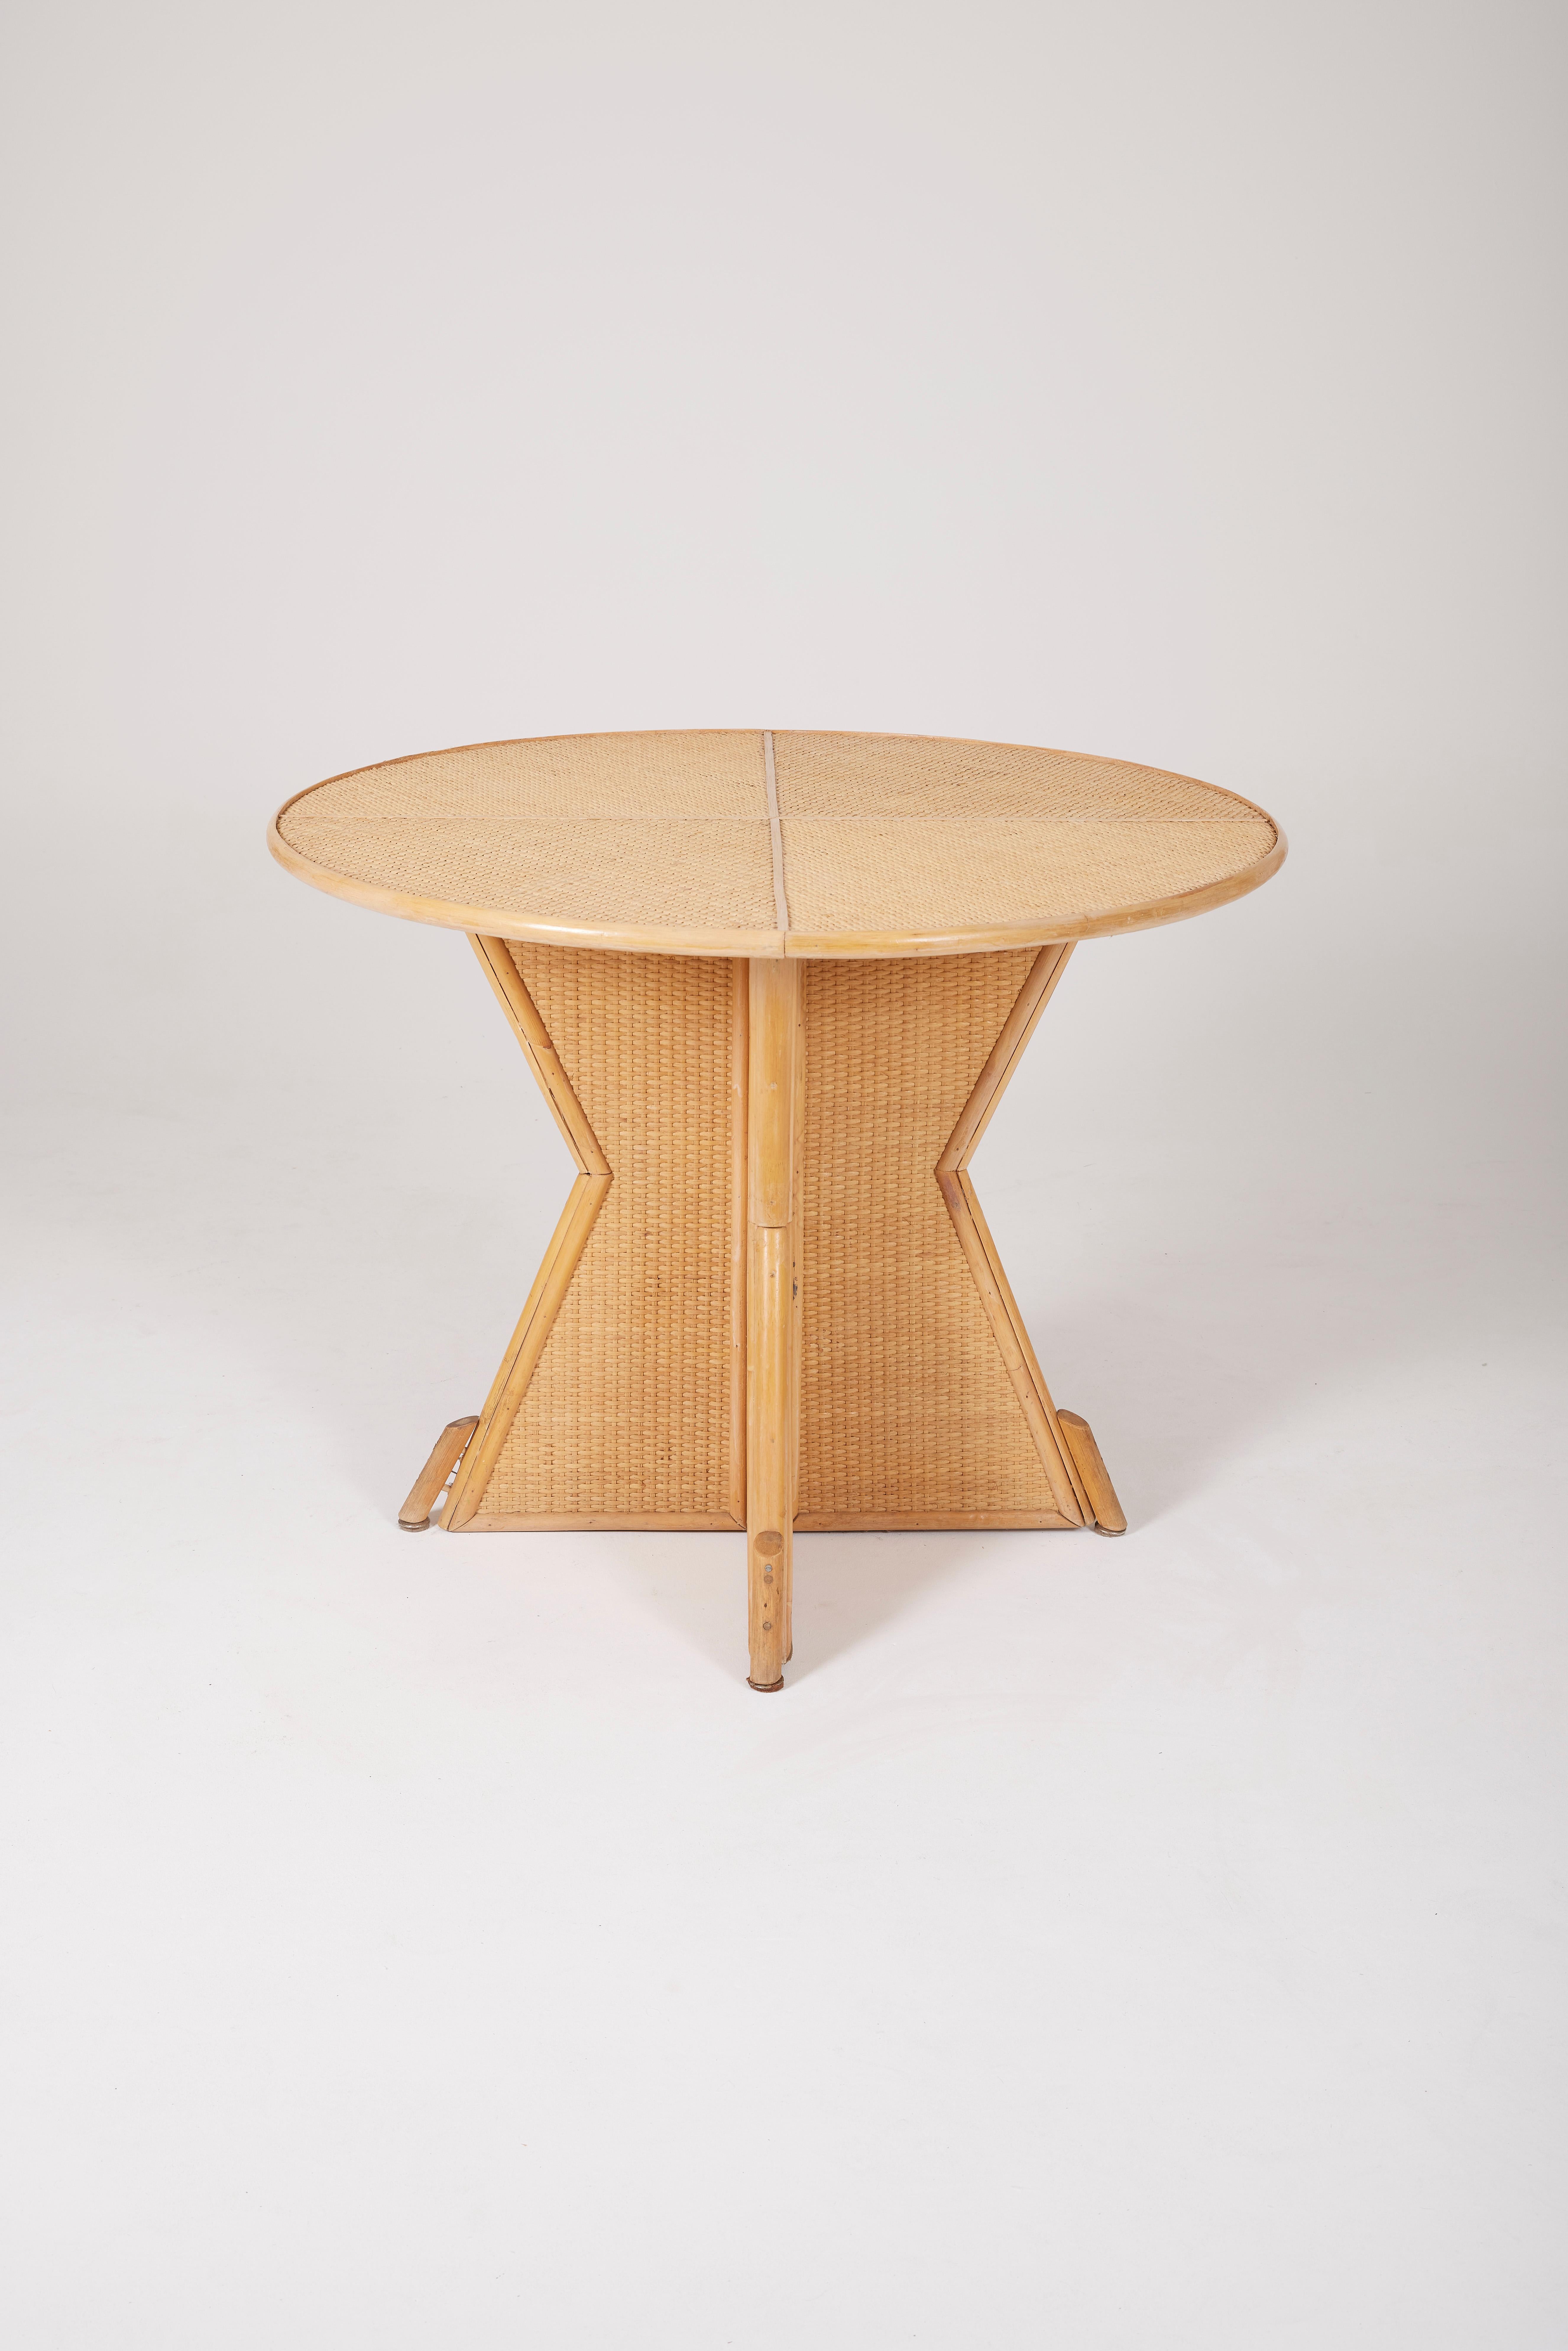 Woven rattan dining table from the 1960s.
LP1459